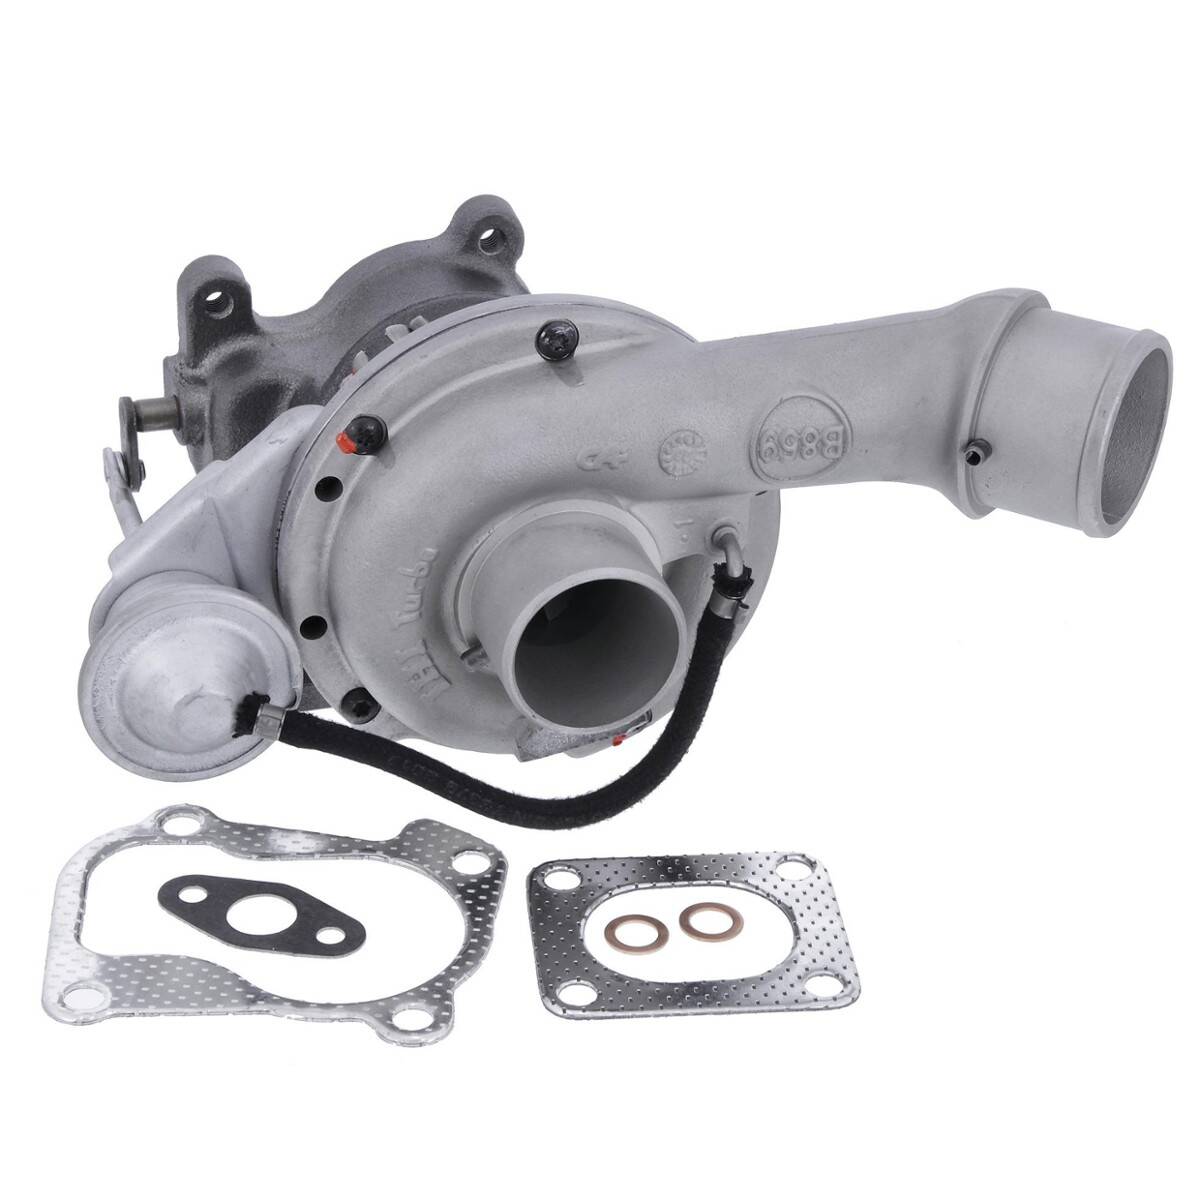 TURBOCHARGER TURBO REMANUFACTURED 46556011 46556011